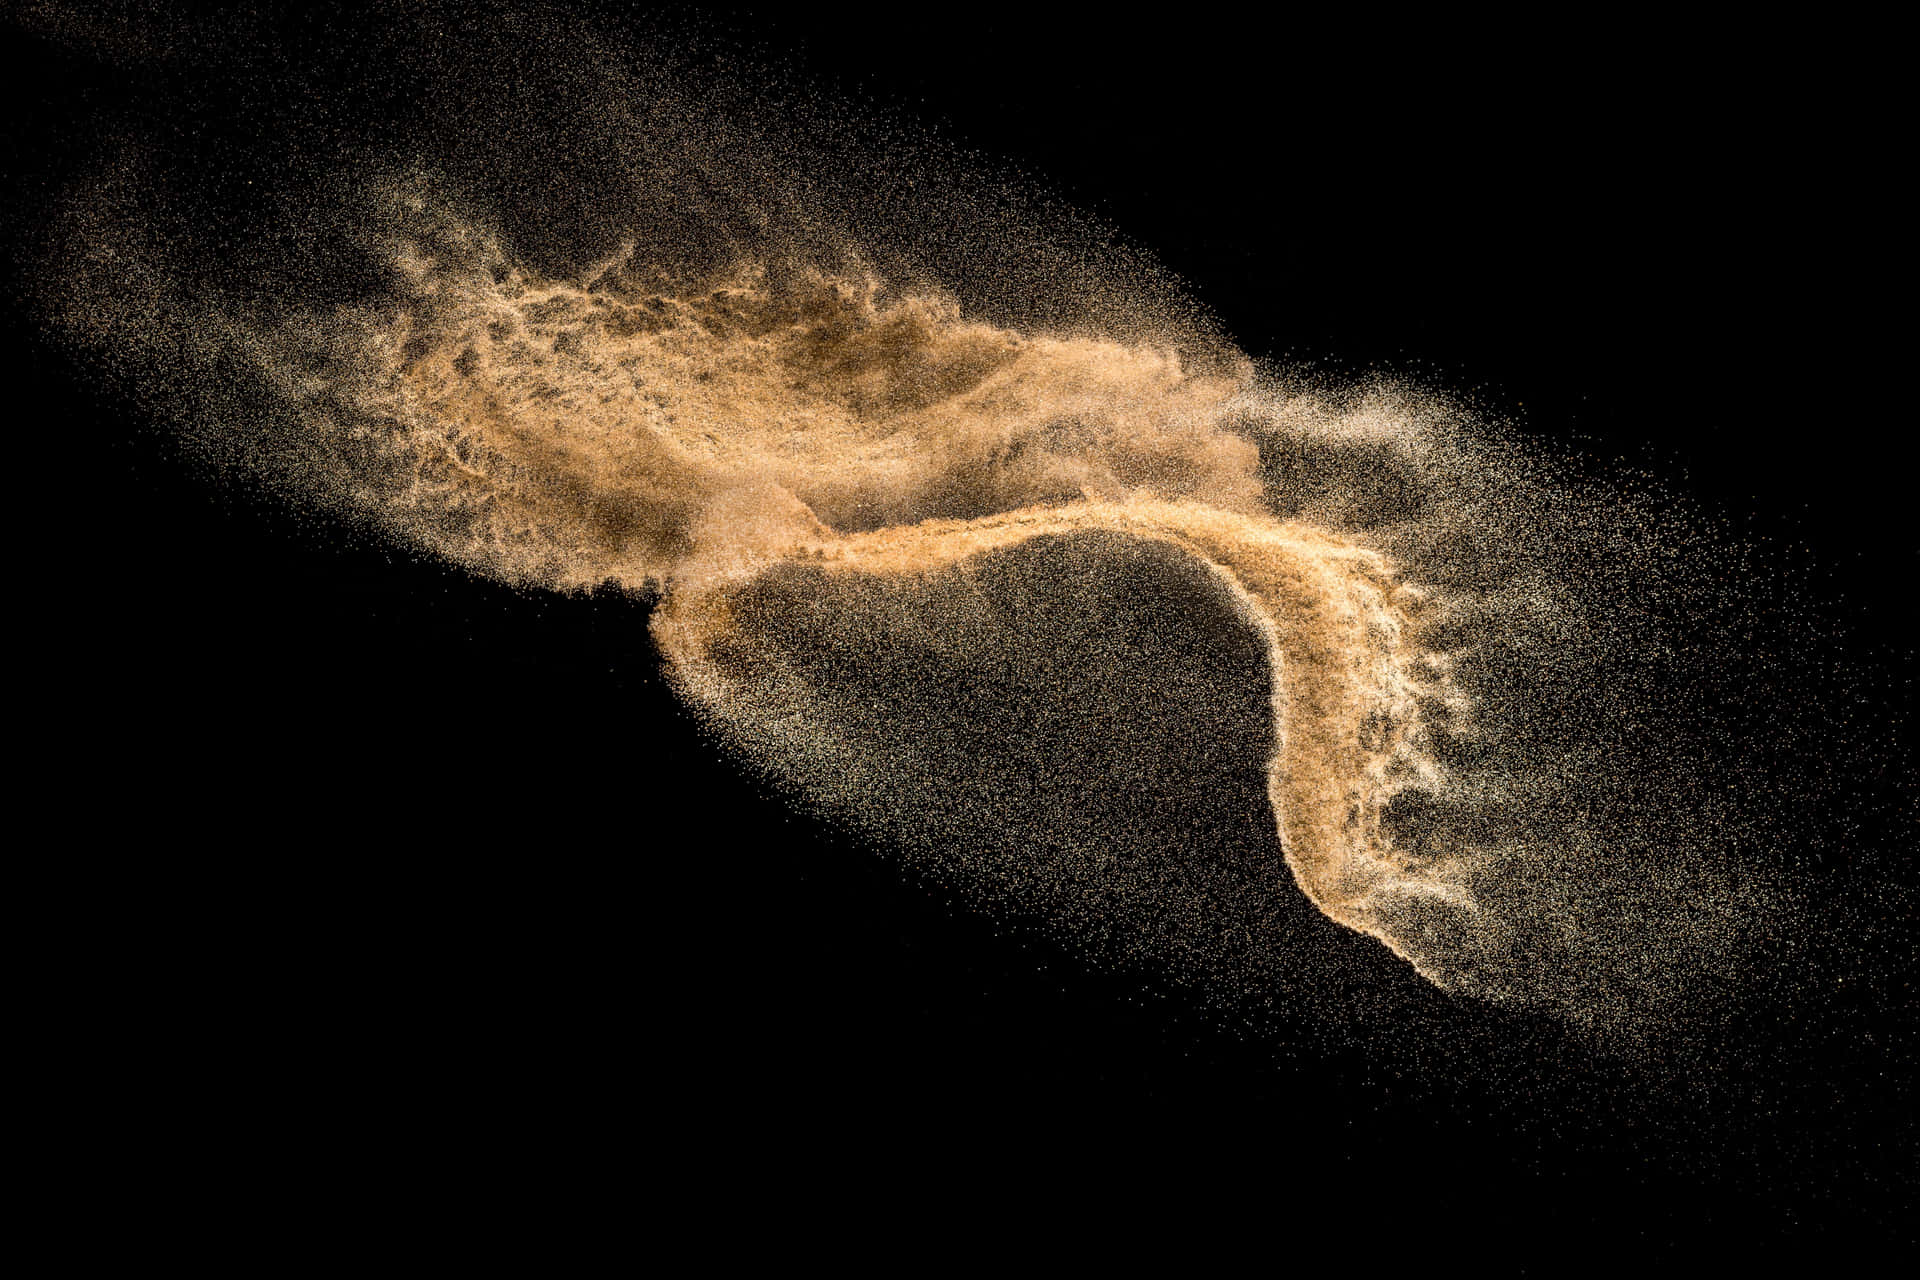 Even the tiniest particle of dust has layers of complexity when viewed up close